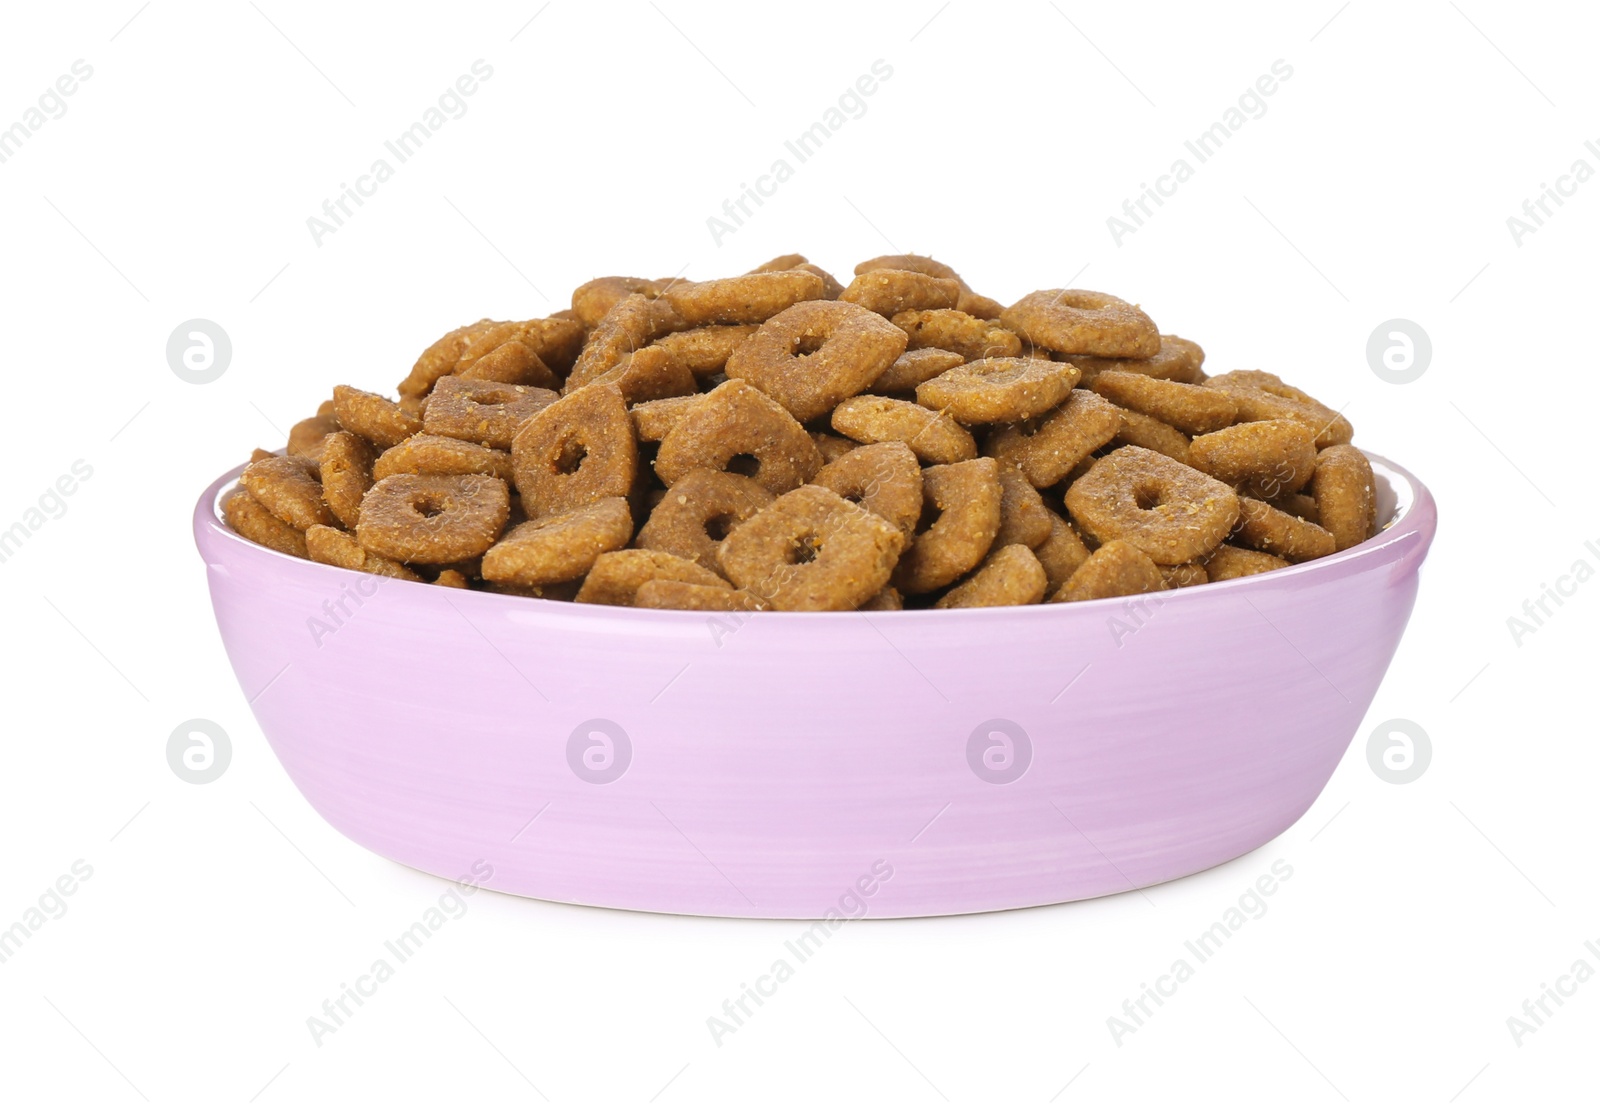 Photo of Dry food in violet pet bowl isolated on white